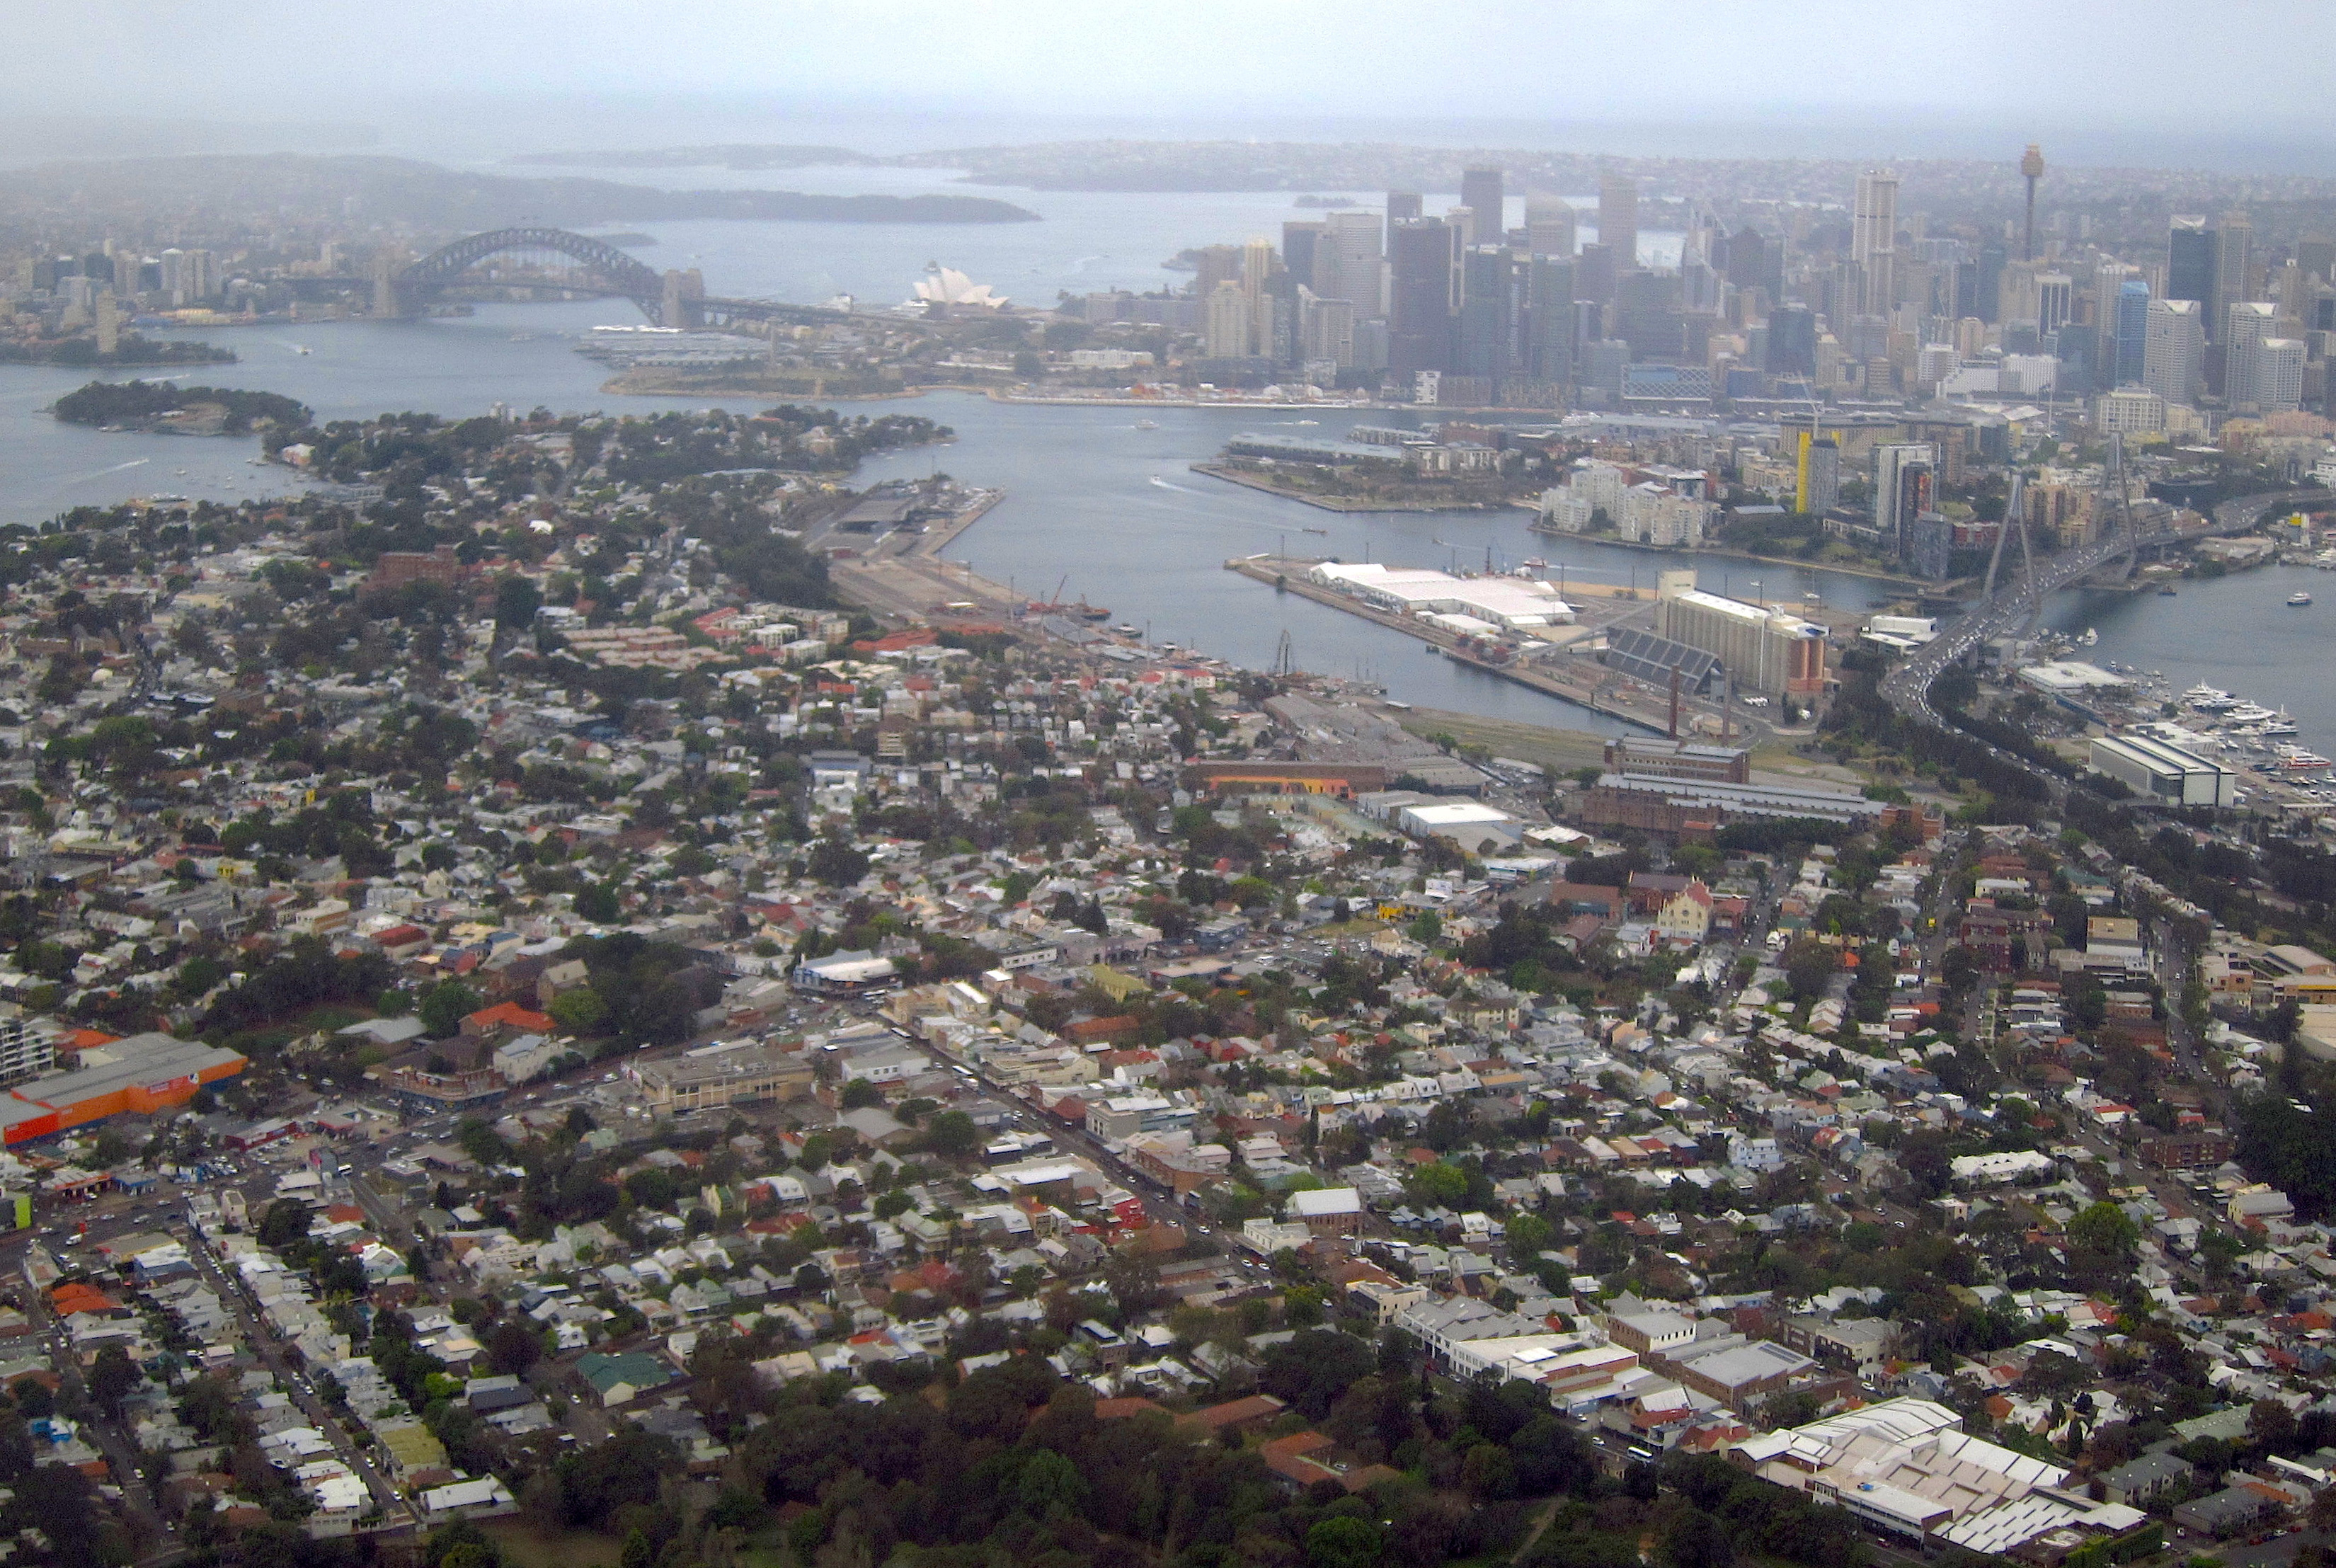 The Sydney Harbour Bridge and Central Business District (CBD) can be behind properties in the Sydney suburb of Rozelle, Australia